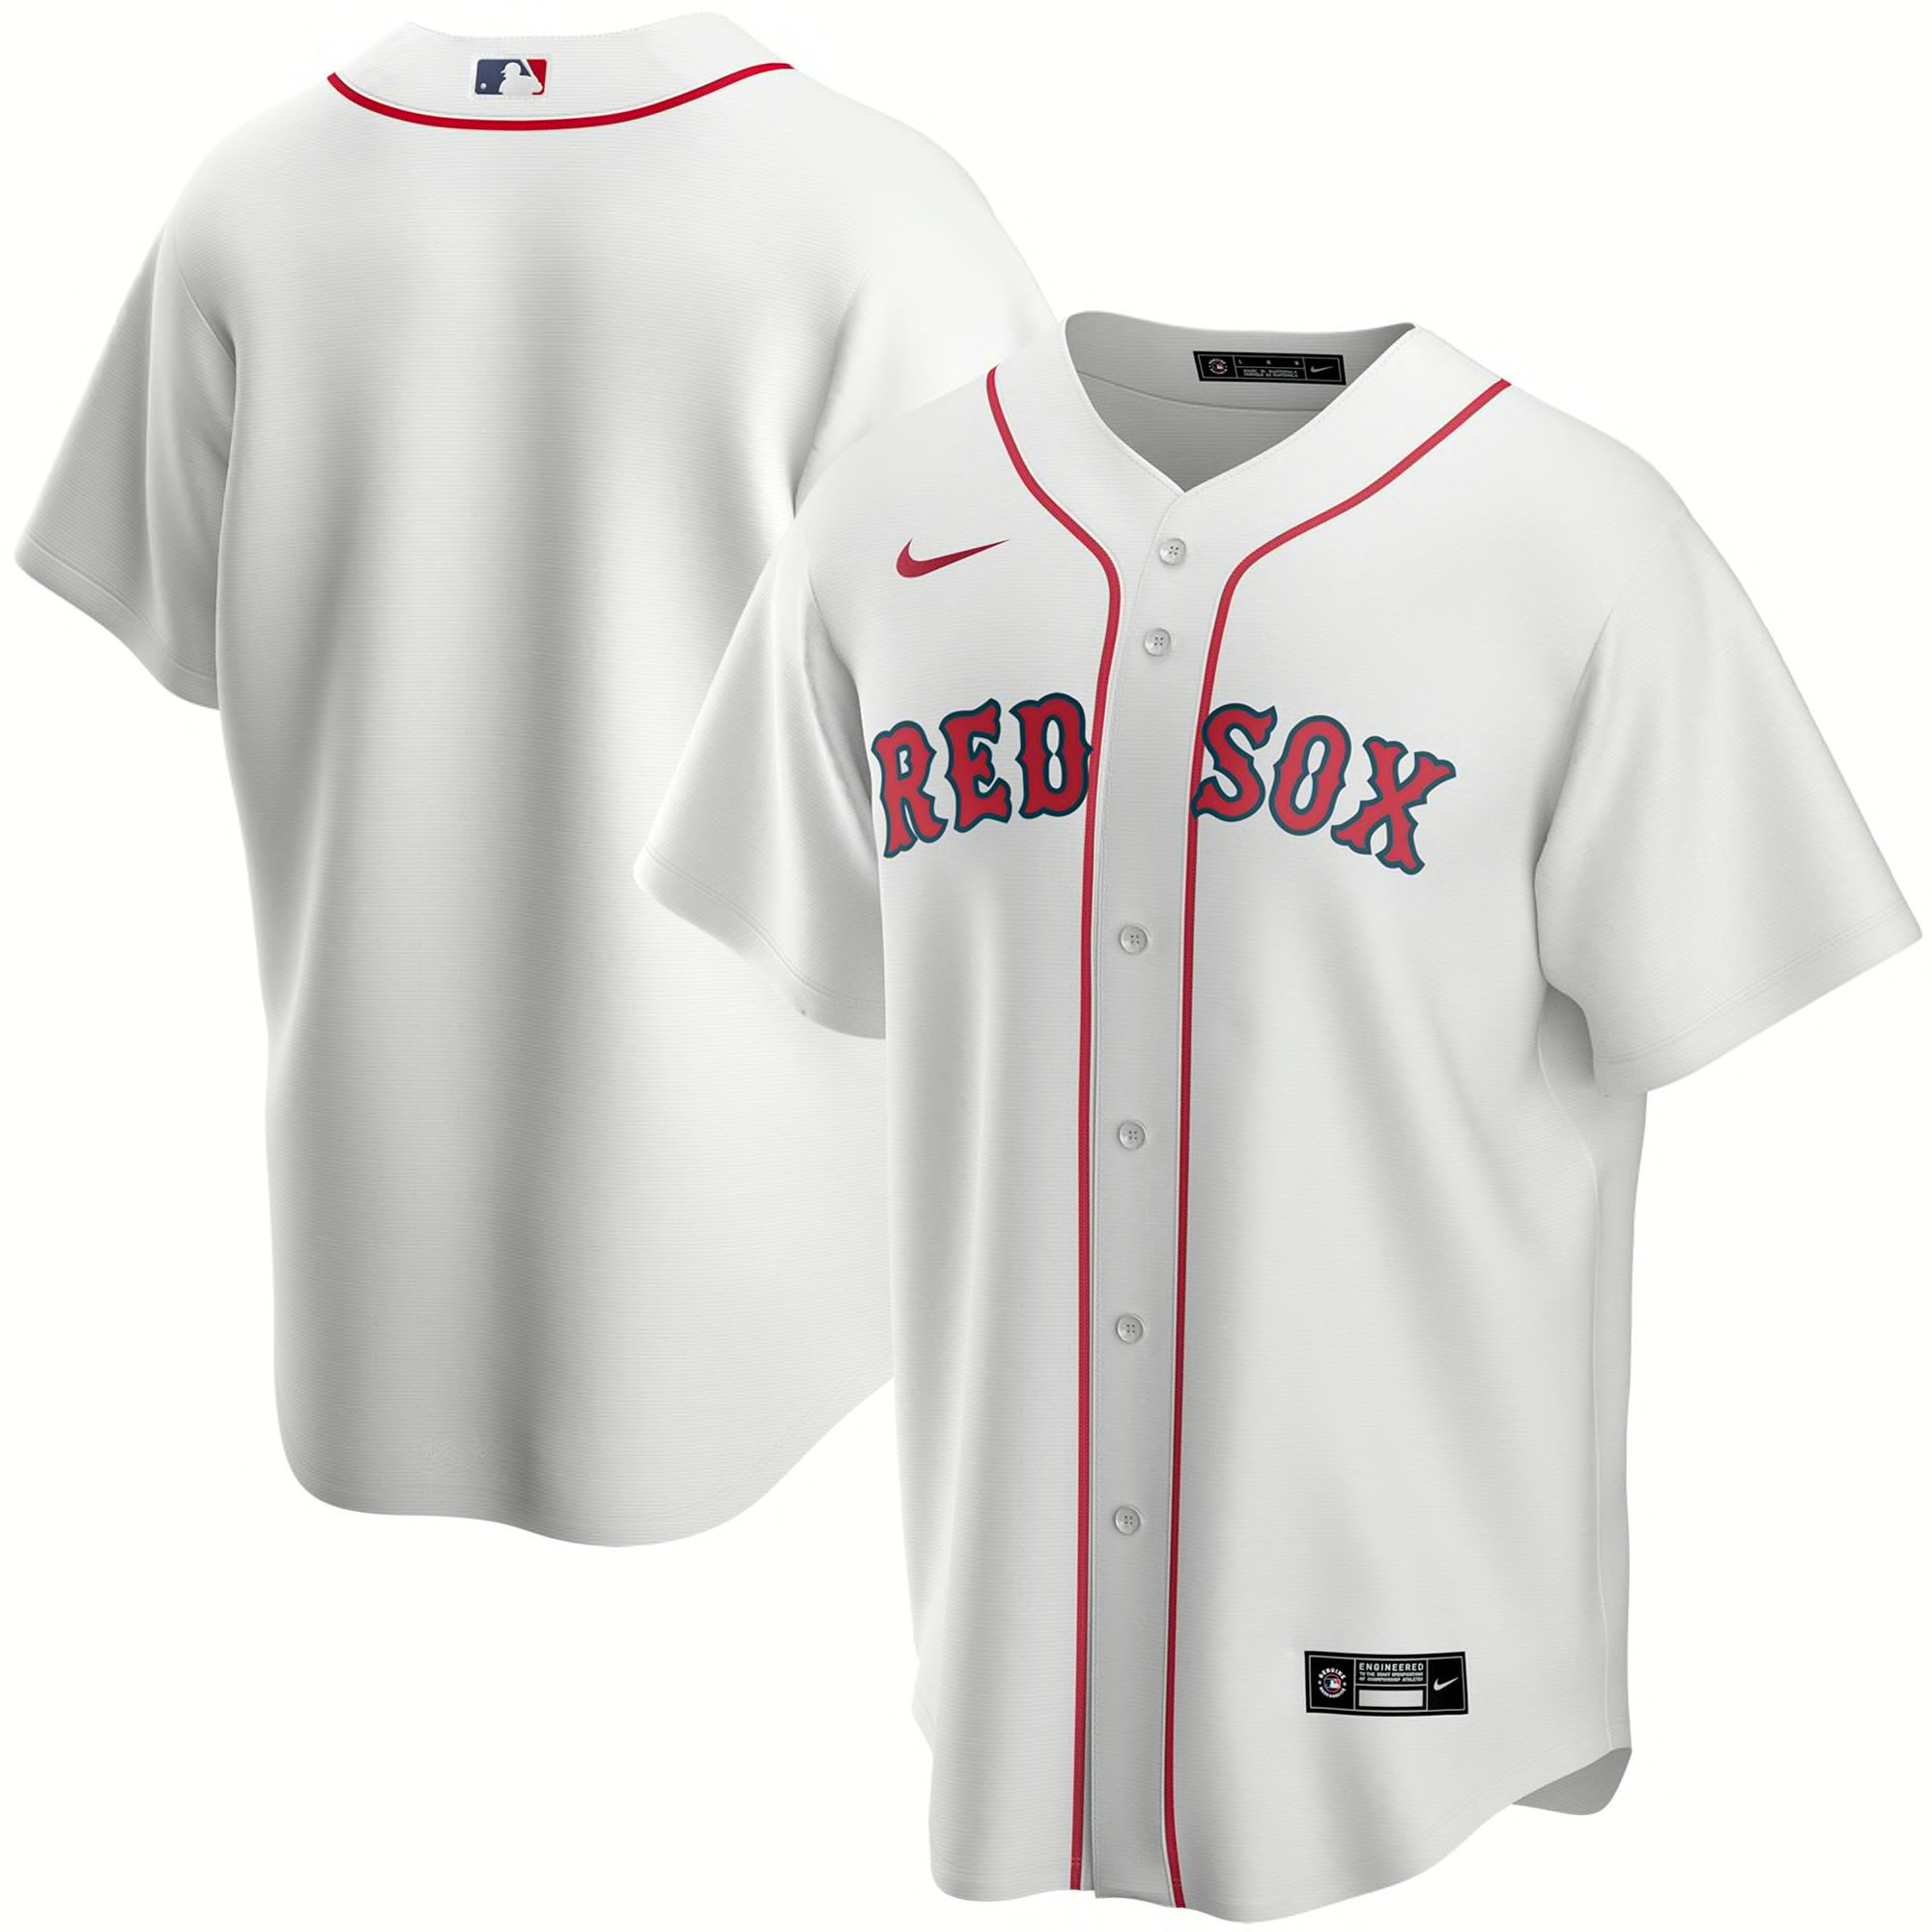 white sox fathers day jersey